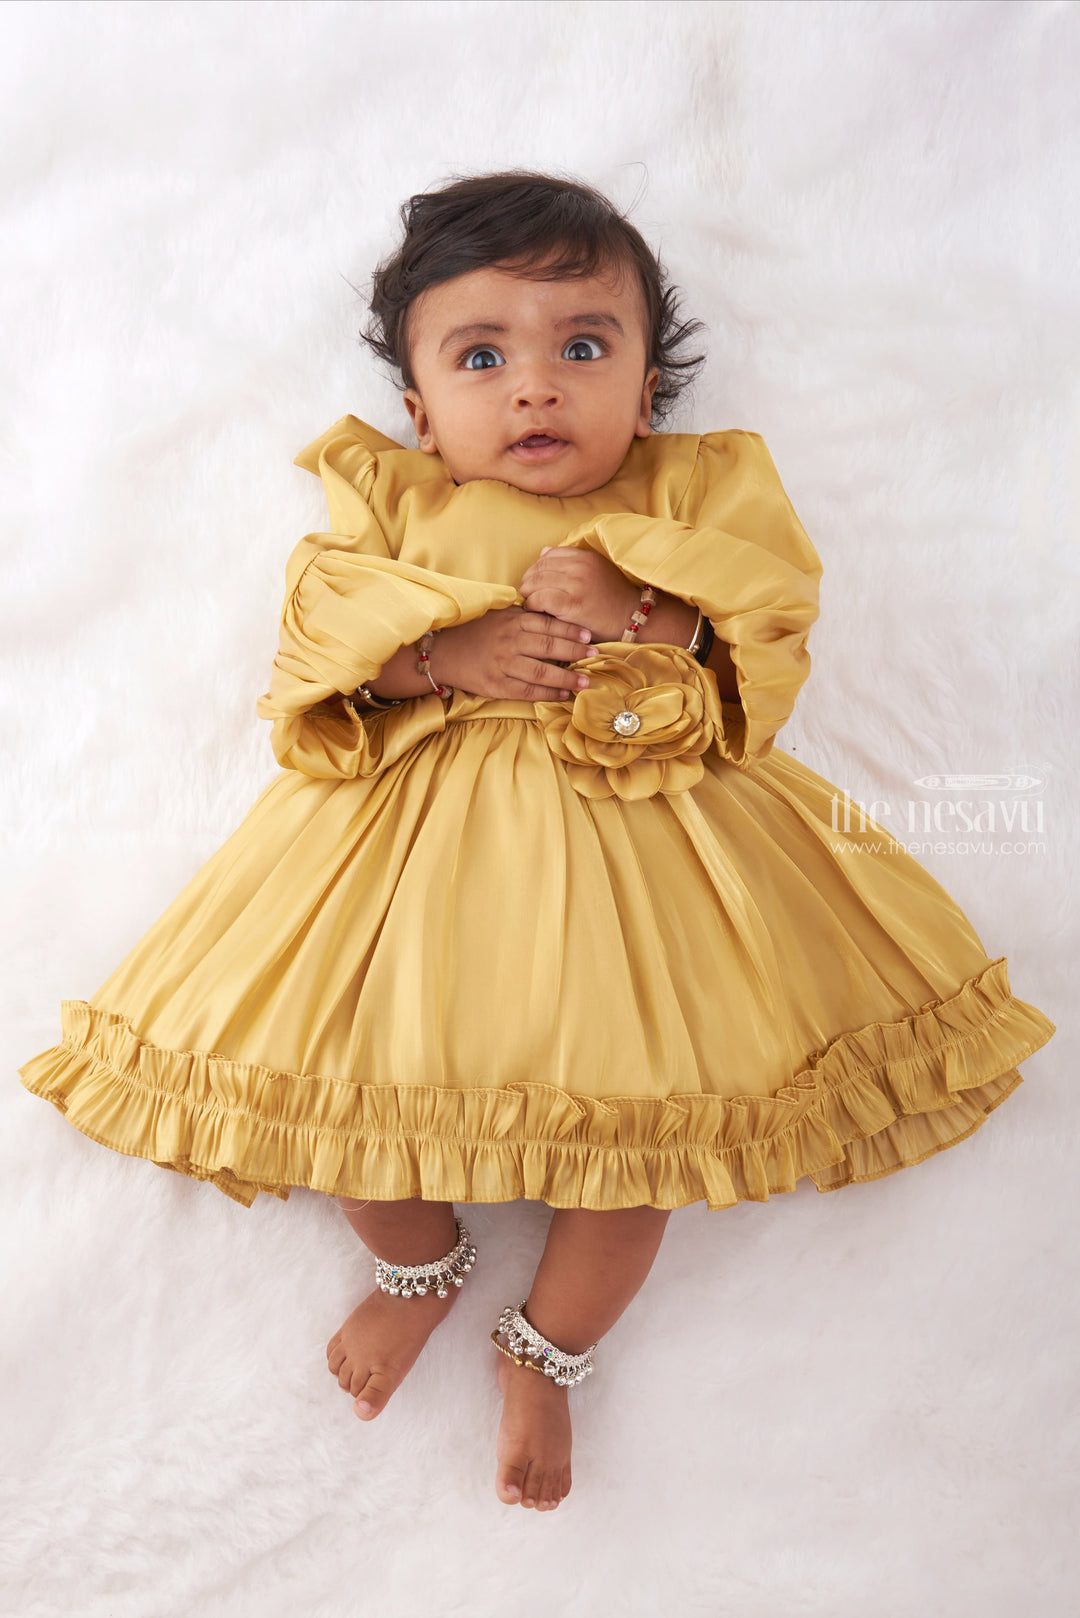 The Nesavu Baby Fancy Frock Glamorous Golden Yellow Organza Baby Frock with Floral Touch - Timeless Elegance Nesavu 14 (6M) / Yellow / Organza Plain BFJ476B-14 Graceful Attires for Little Darlings | Baby Girl Frocks | The Nesavu